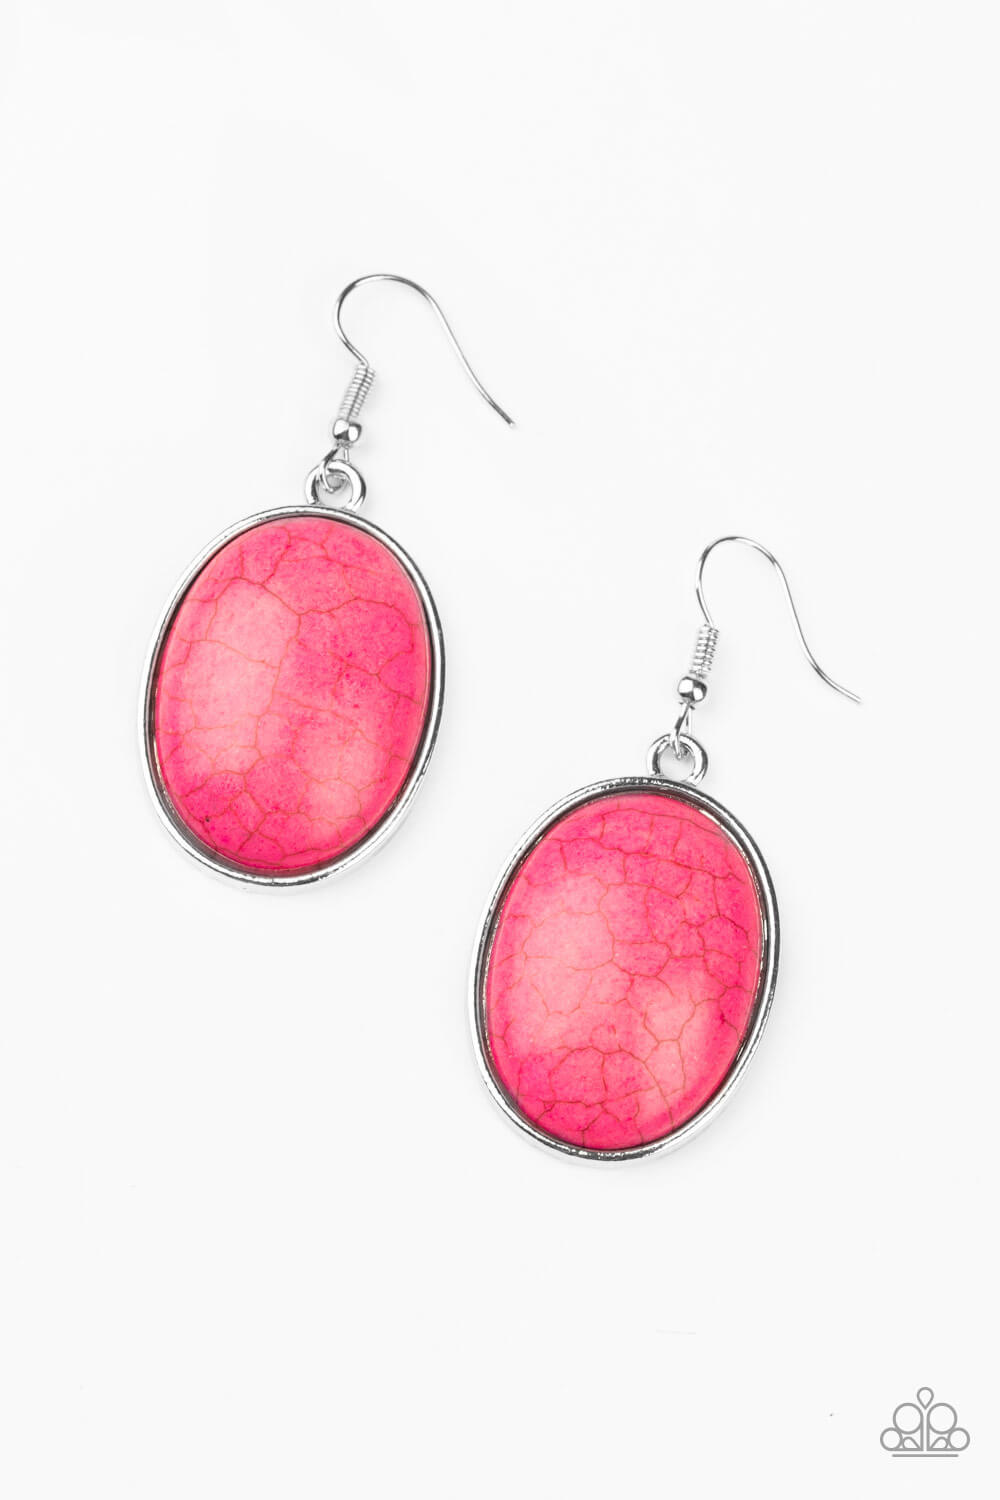 Serenely Sediment - Pink Earrings - Princess Glam Shop